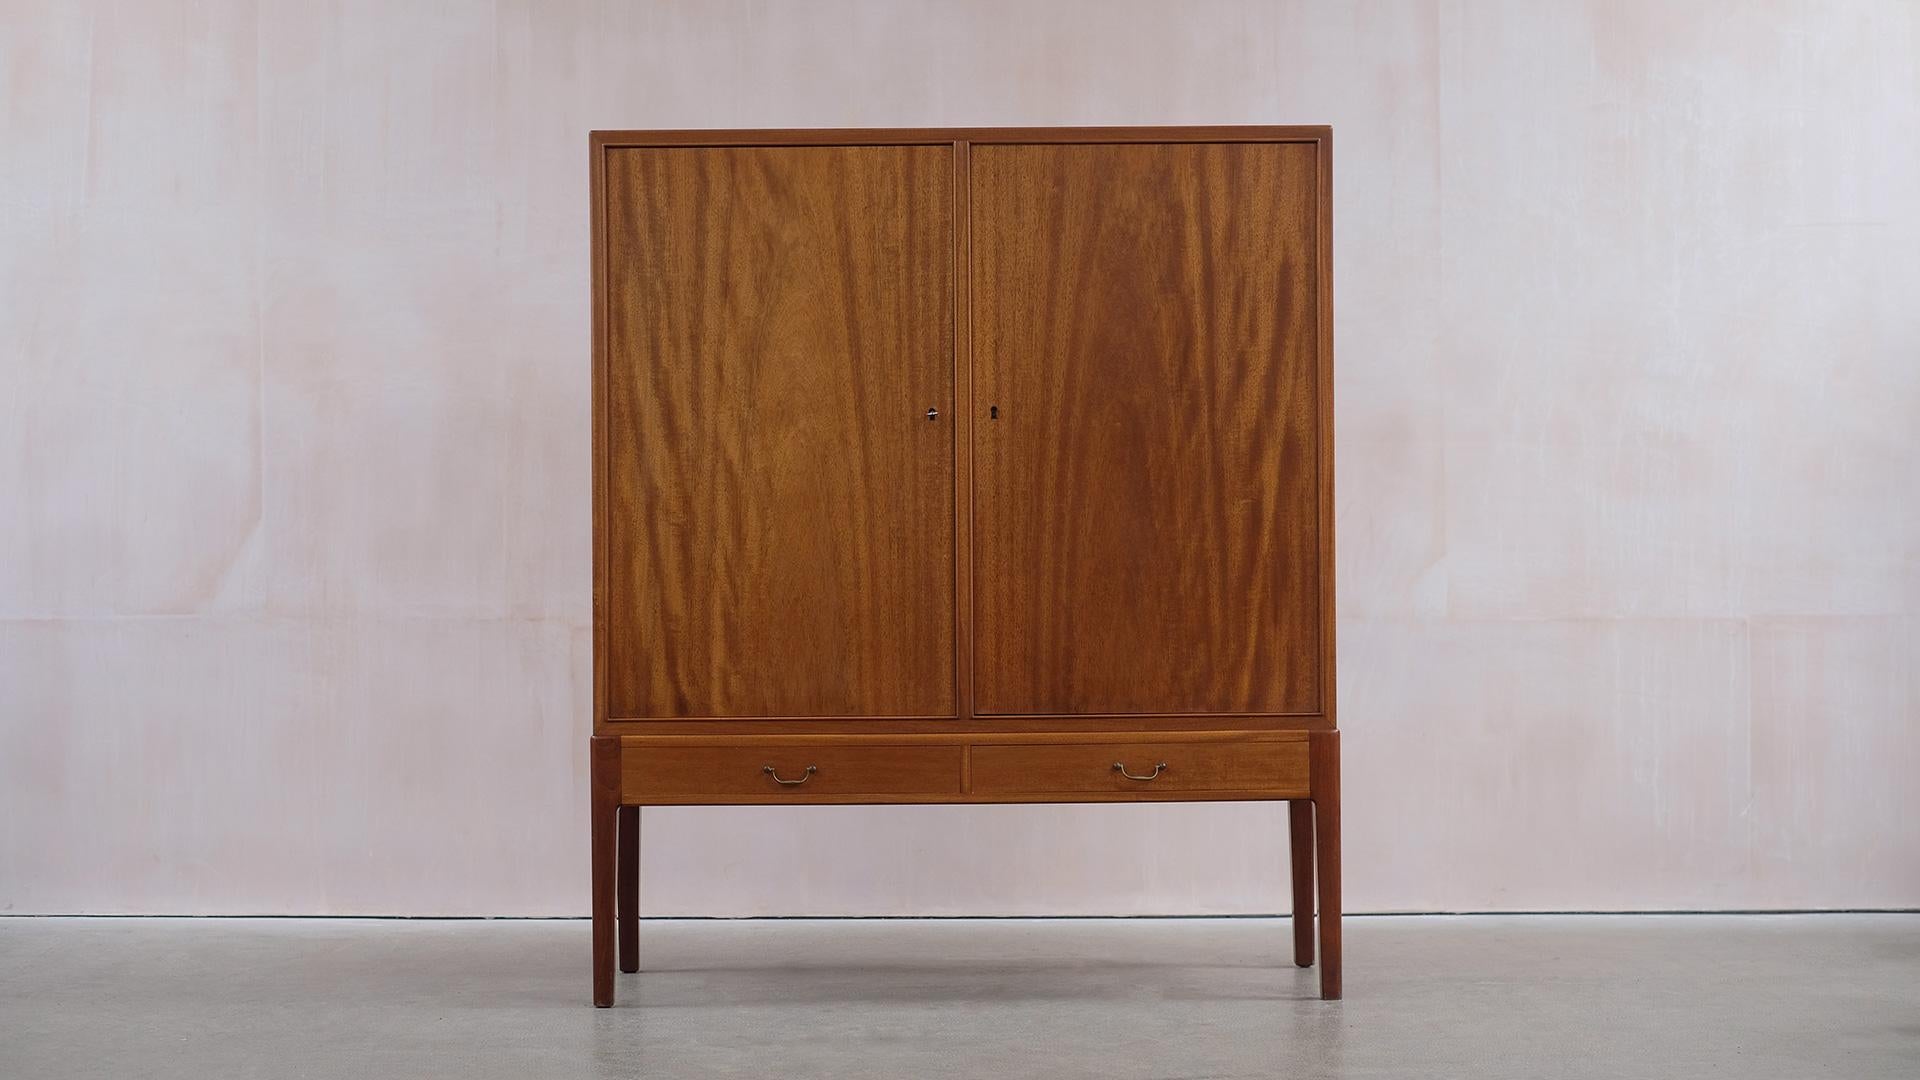 Wonderful 1940’s Danish linen press in Mahogany by a Danish Cabinetmaker. Superb proportions and excellent quality with fine detailing throughout. Great piece, both beautiful and super useful. 
